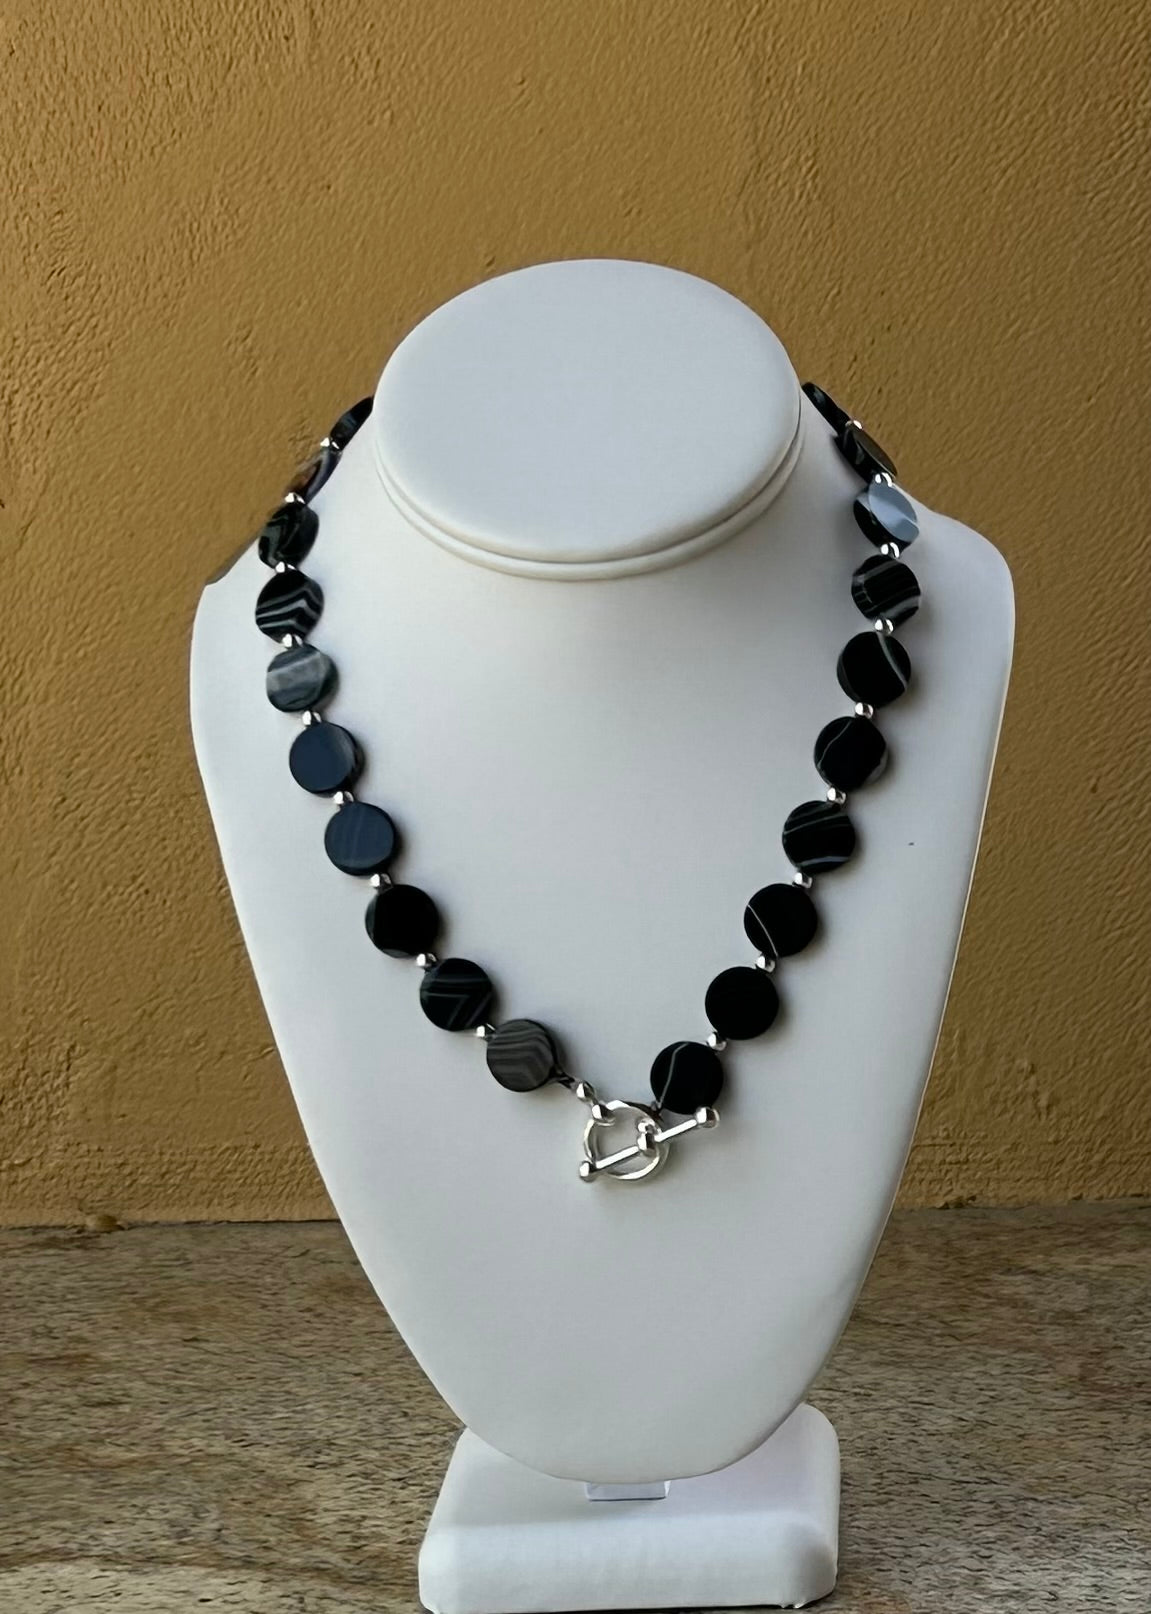 Necklace - round disk shape onyx, sterling silver beads and a chunky toggle